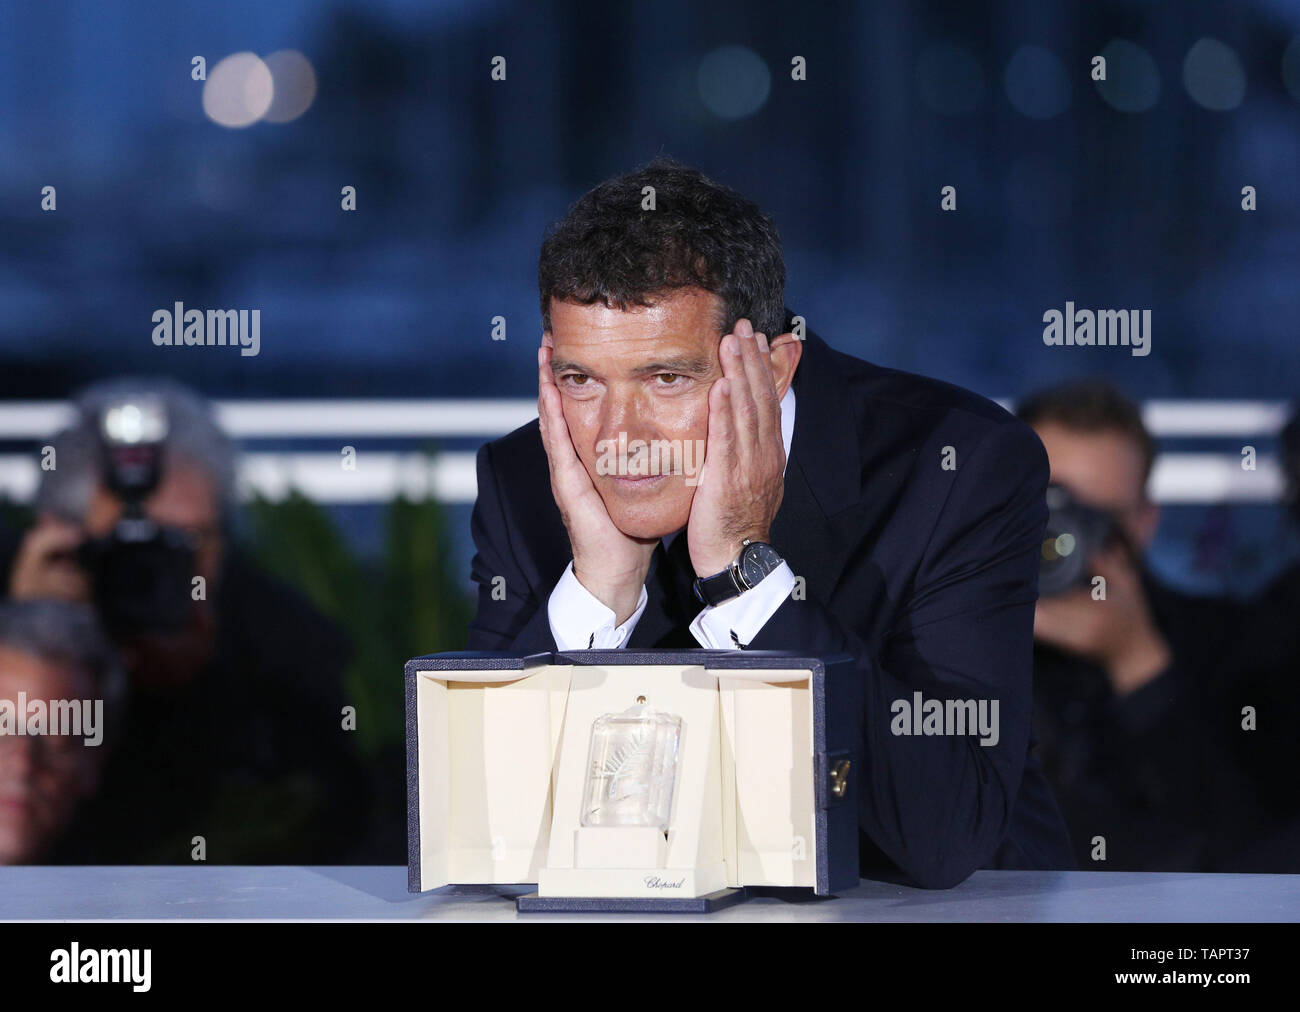 (190526) -- CANNES, May 26, 2019 (Xinhua) -- Antonio Banderas, winner of the Best Actor award for the film 'Dolor Y Gloria (Pain and Glory)' poses during a photocall at the 72nd Cannes Film Festival in Cannes, France, on May 25, 2019. The curtain of the 72nd edition of the Cannes Film Festival fell on Saturday evening, with South Korean movie 'Parasite' winning this year's most prestigious award, the Palme d'Or. (Xinhua/Gao Jing) Stock Photo